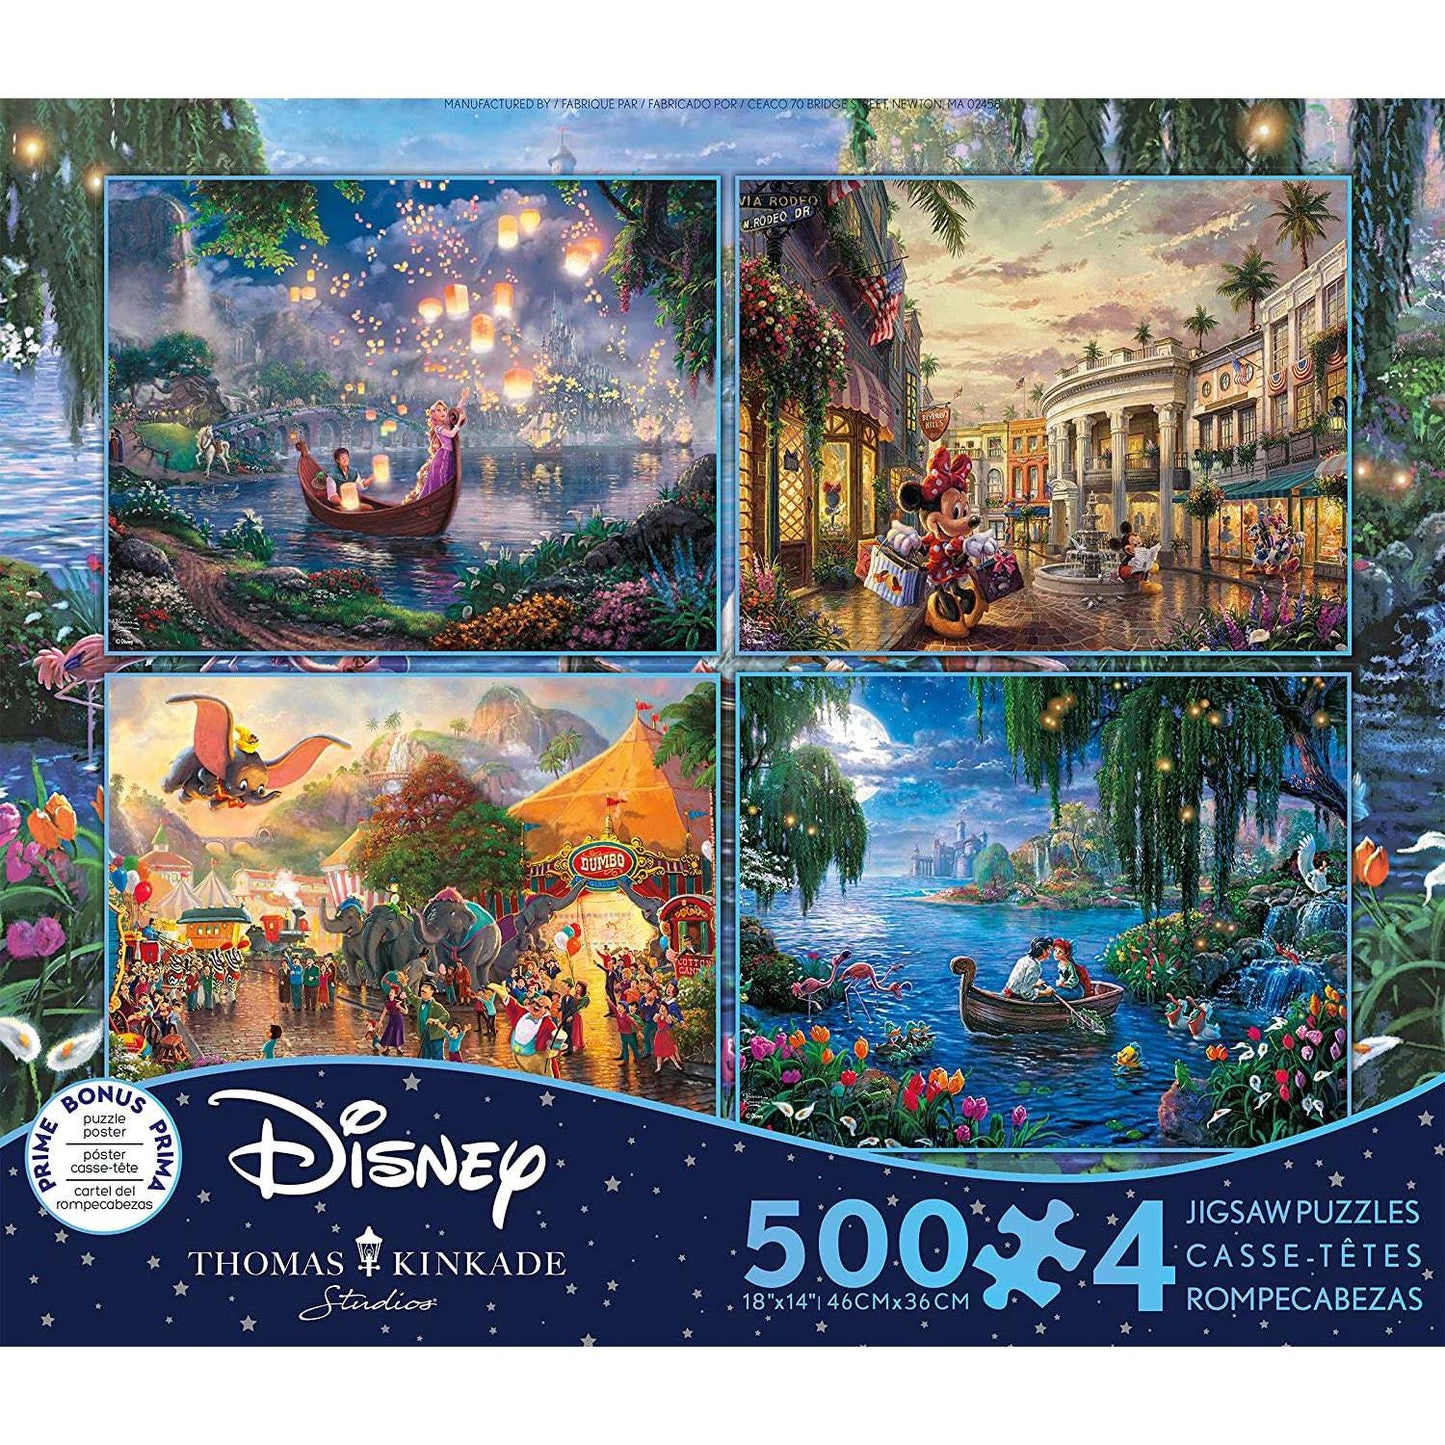 Ceaco Thomas Kinkade The Disney Dreams Collection 4 in 1 500 pc Puzzles [Tangled, Minnie Mouse, Dumbo and Little Mermaid]